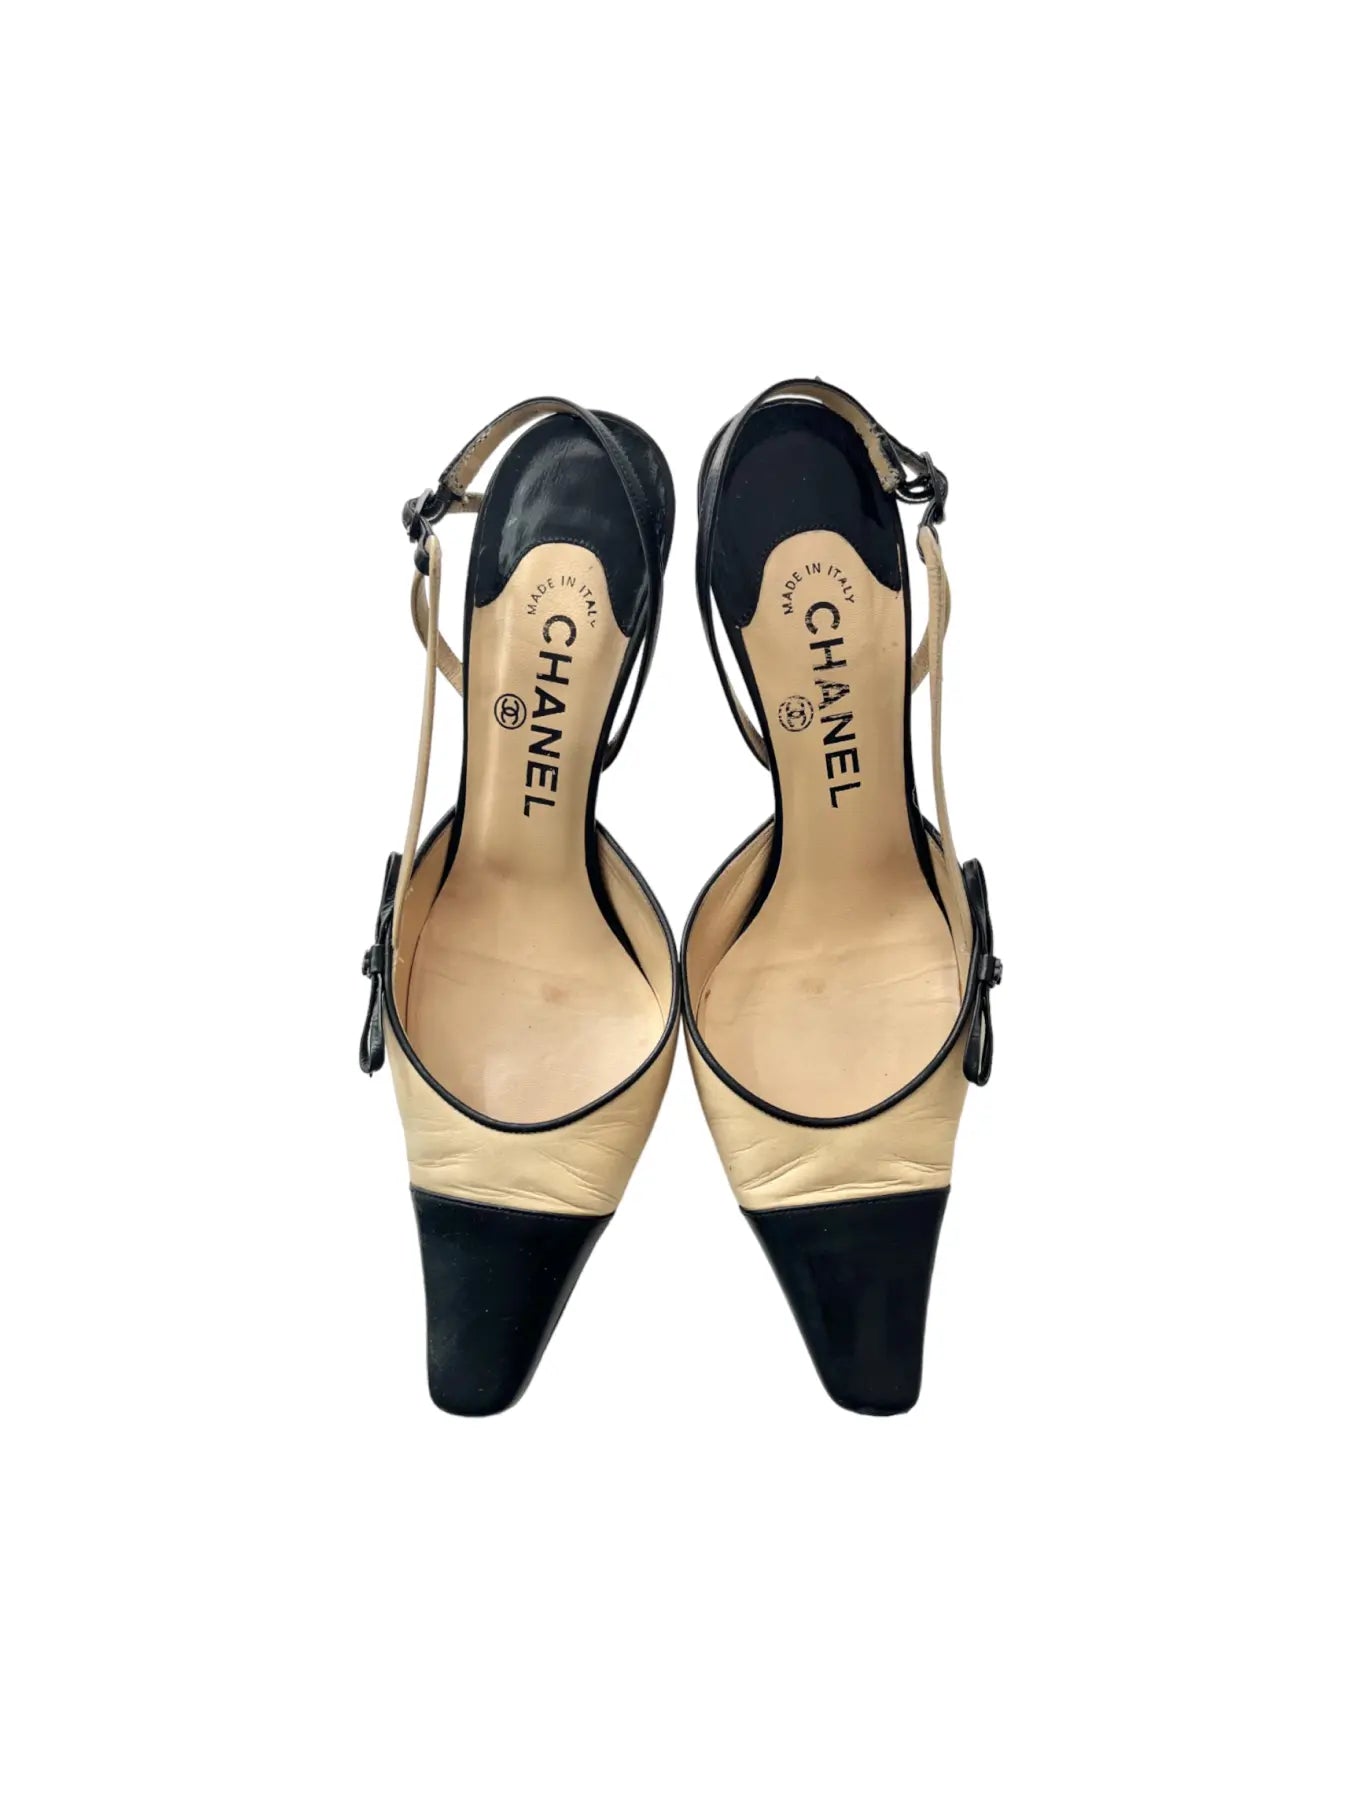 CHANEL Slingback Heels, 37 – Archive Square